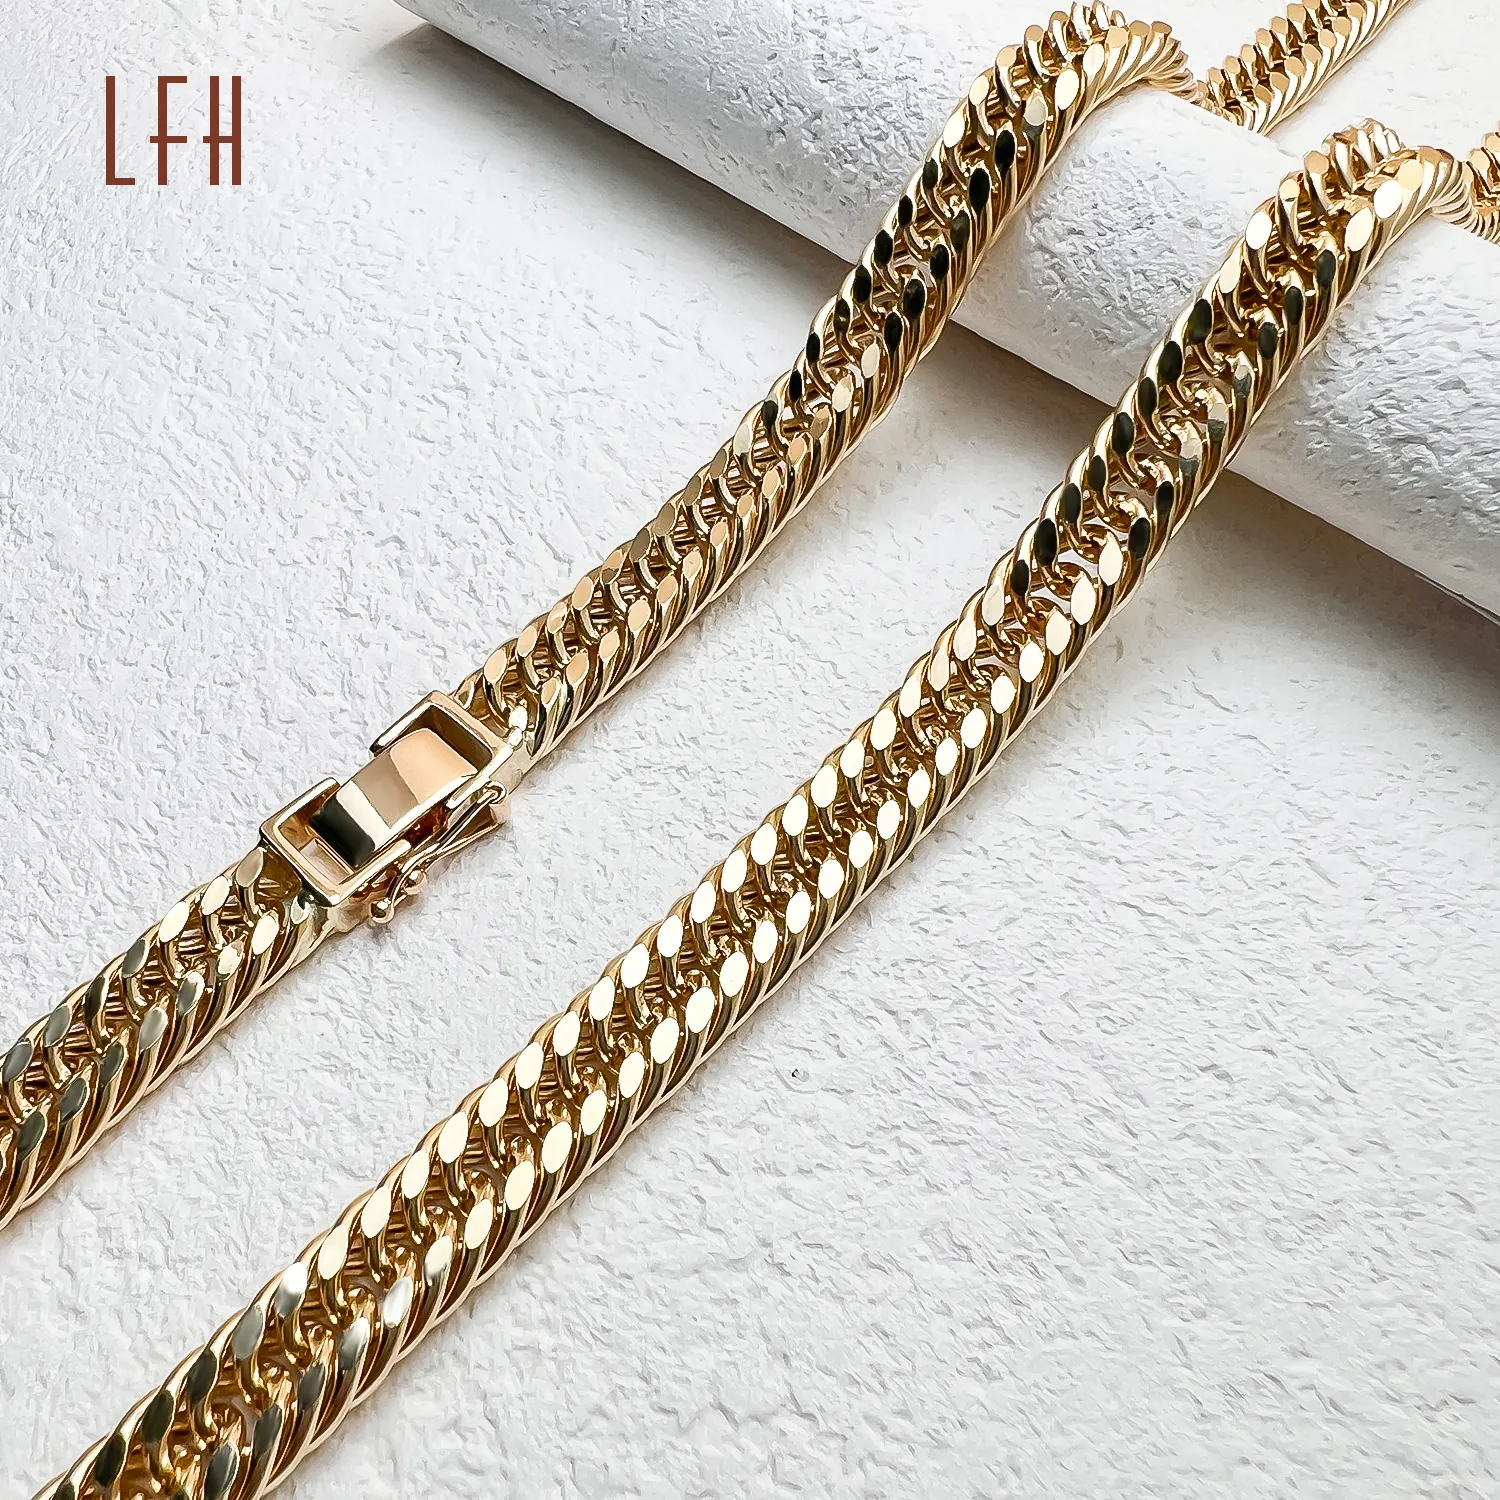 AU 750 Solid Necklaces Real Gold Cuban Link Chain Real Gold Jewelry 18k With Certificate Japan Gold Jewelry 18k Real Wholesale